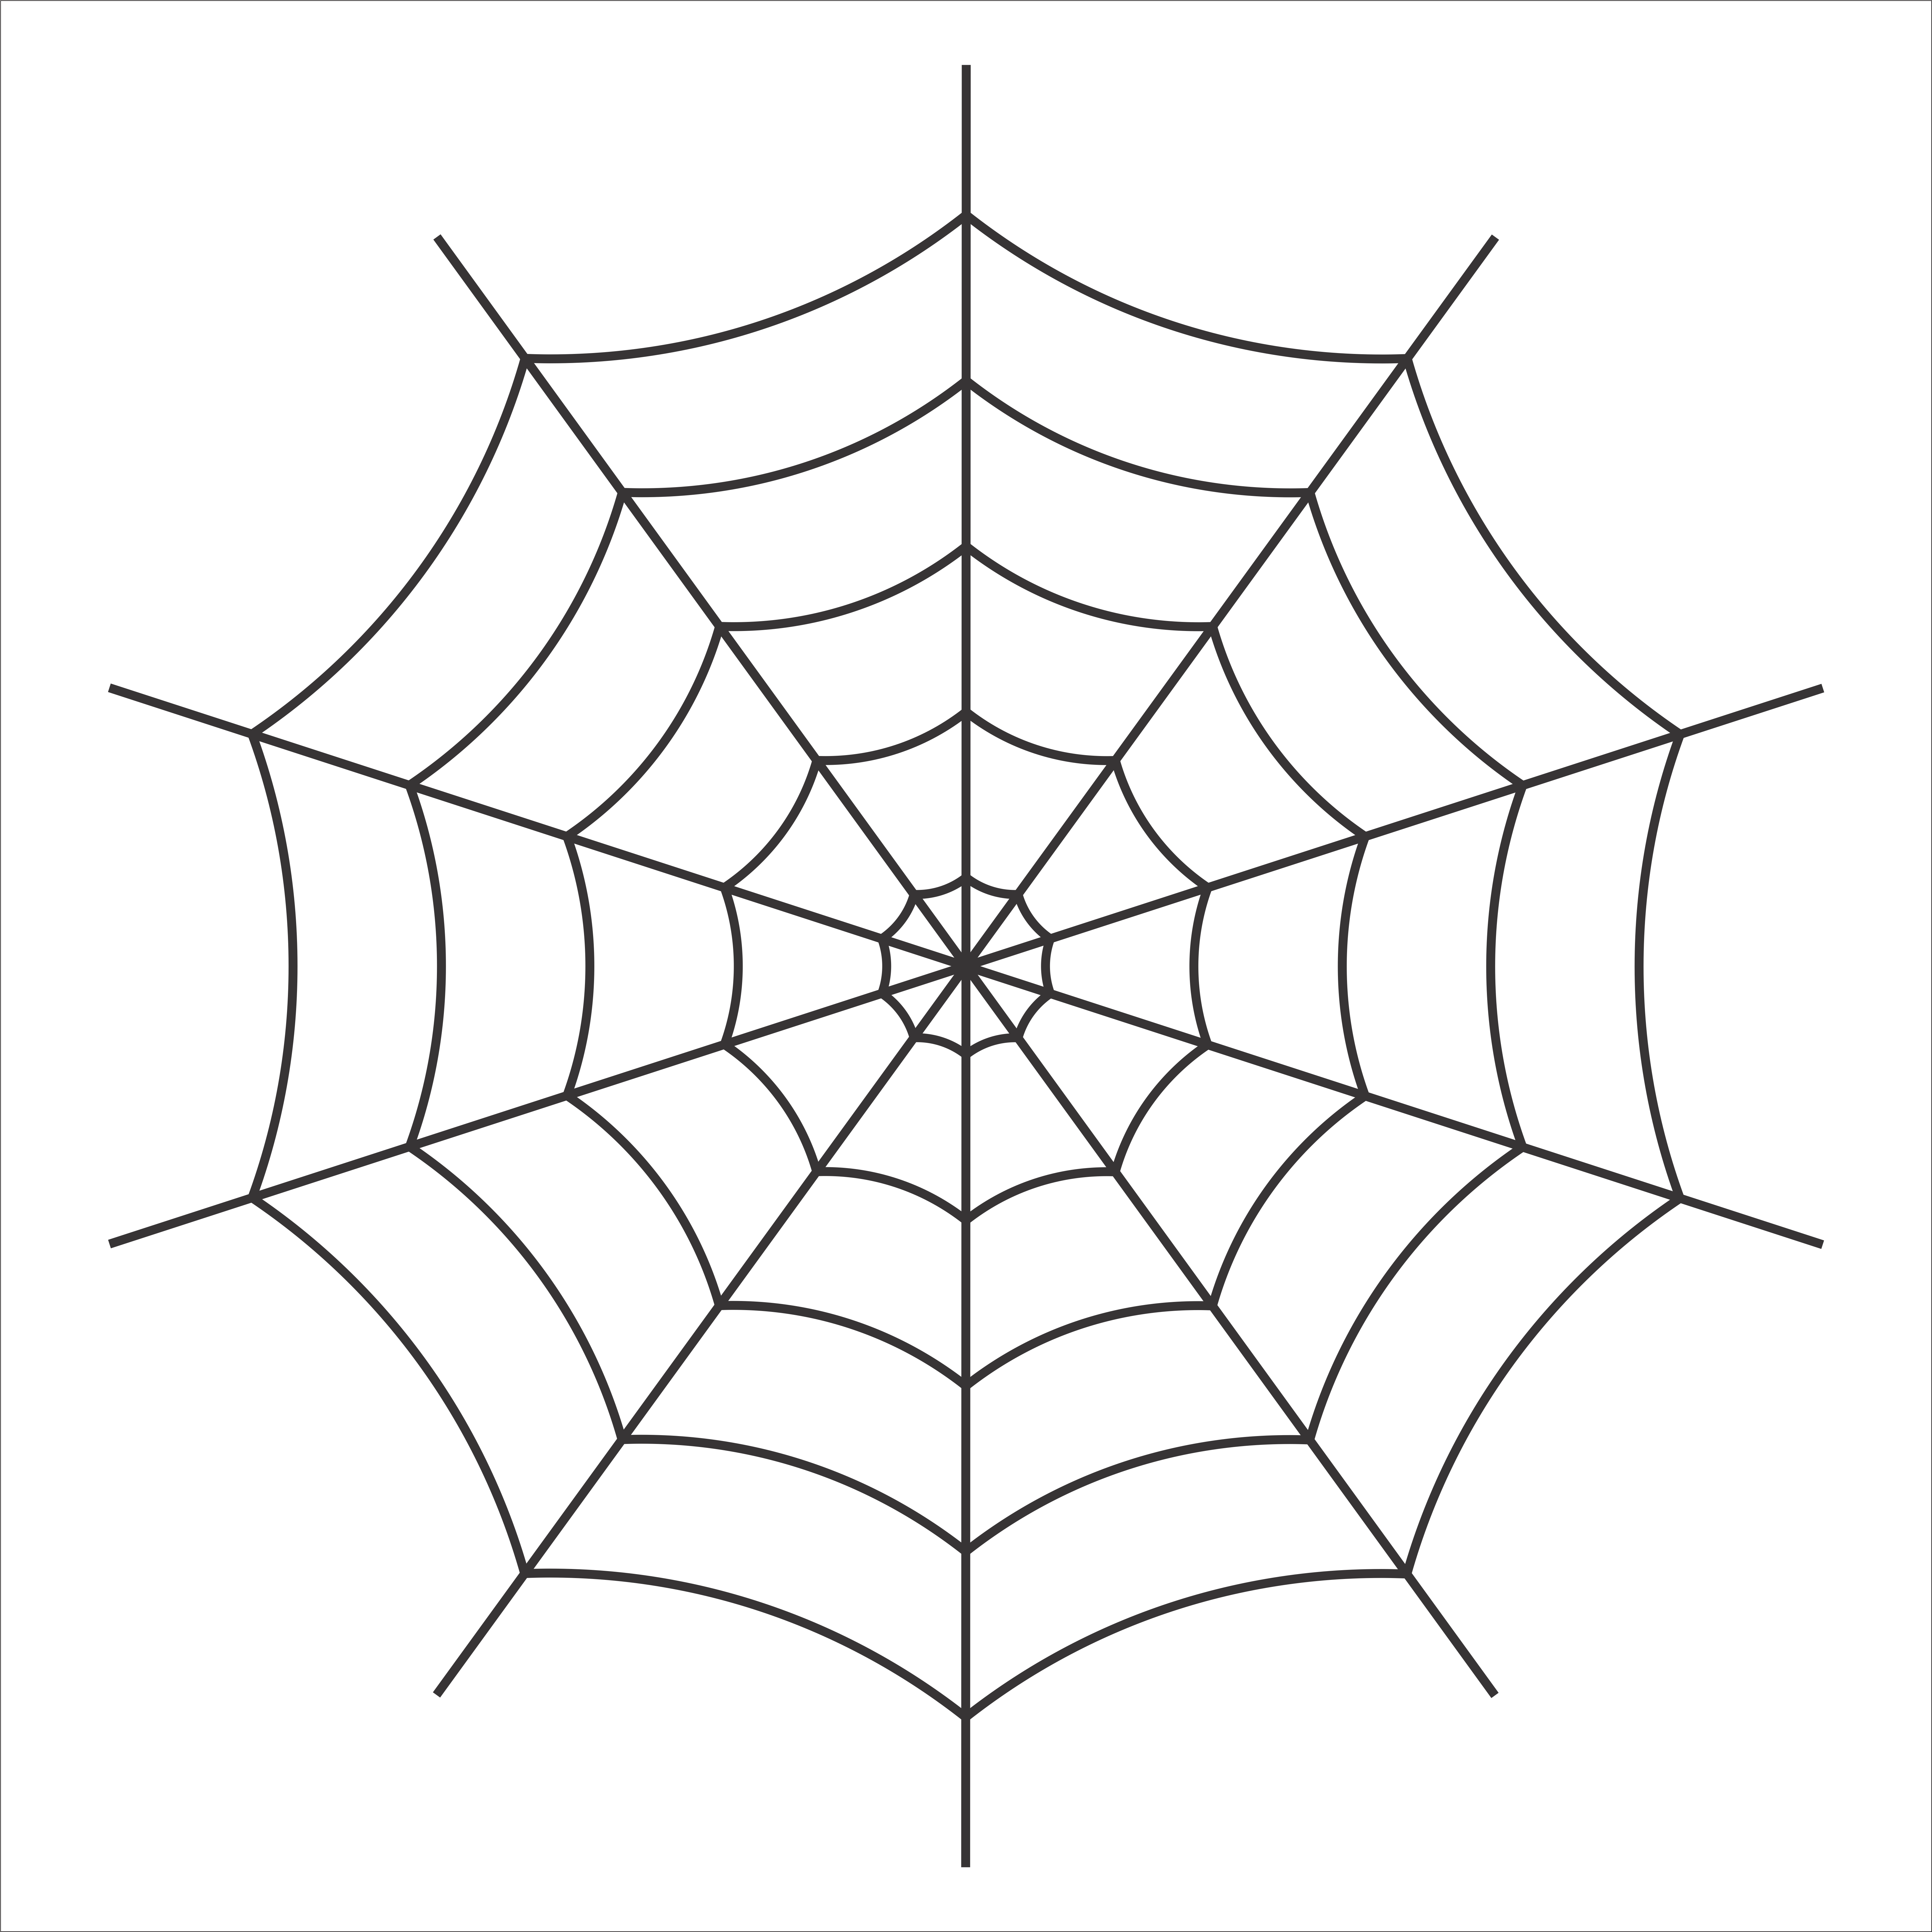 ☑ How to draw a cobweb for halloween | ann's blog